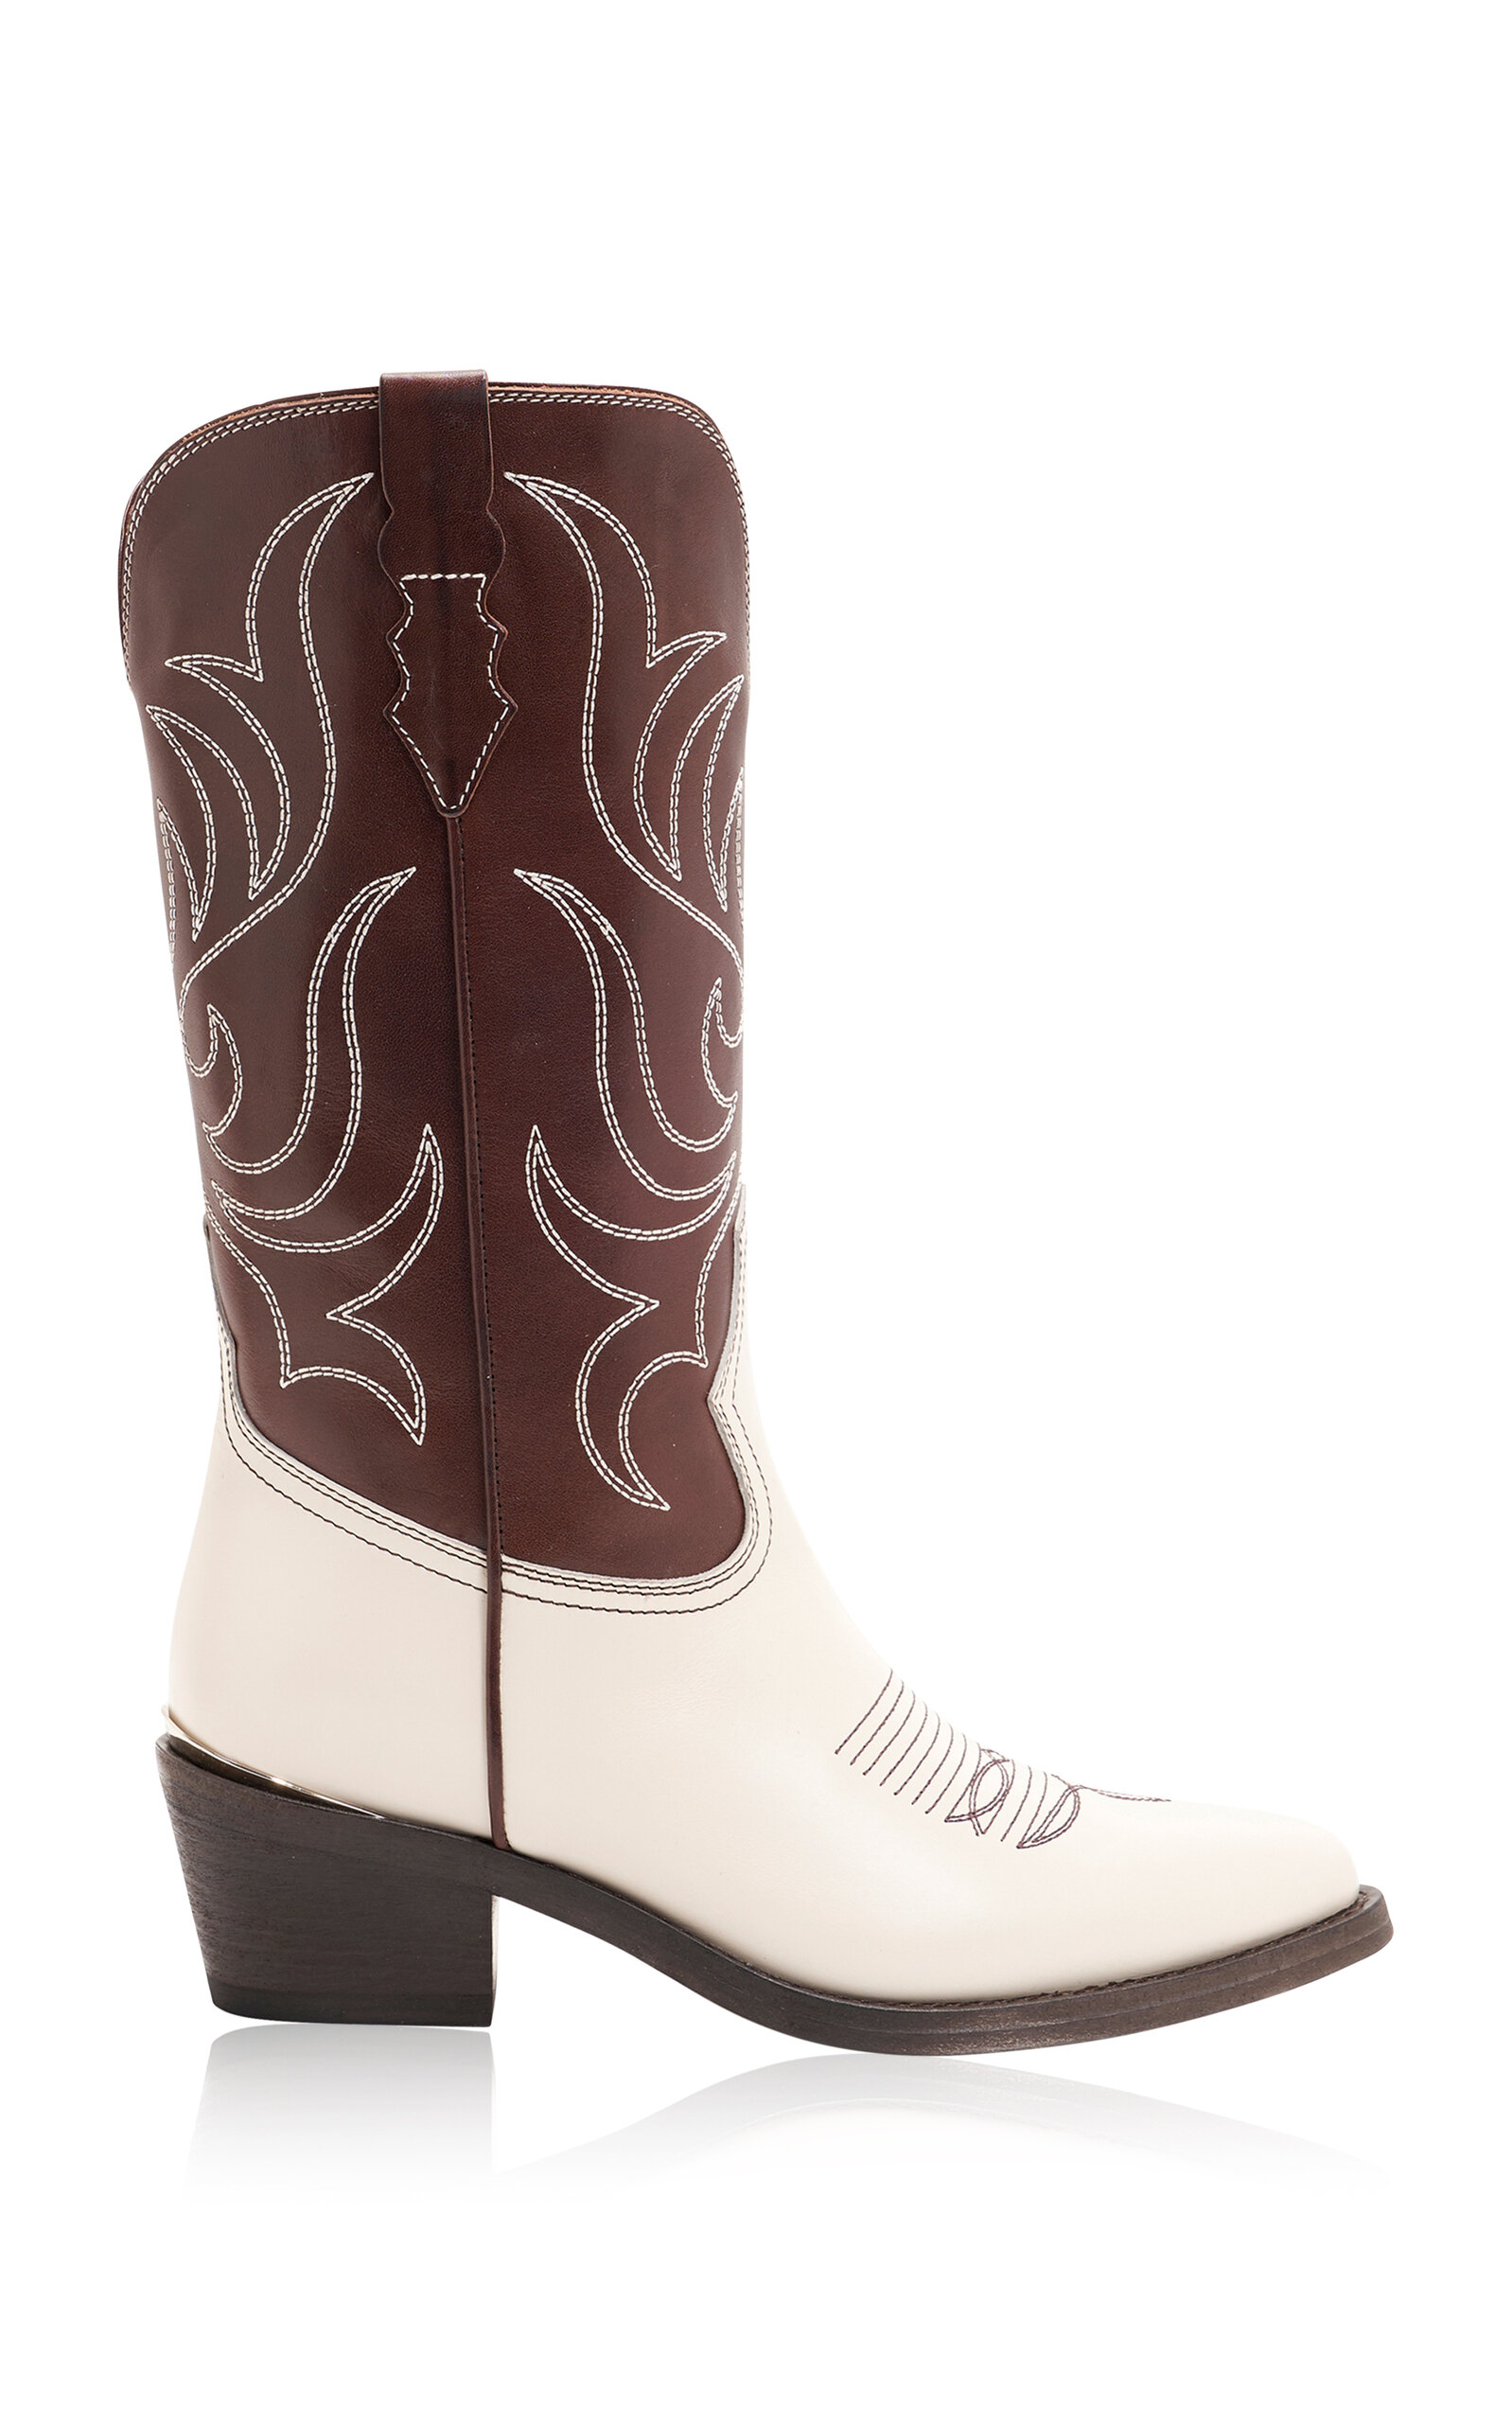 Rowan Two-Tone Embroidered Leather Western Boots